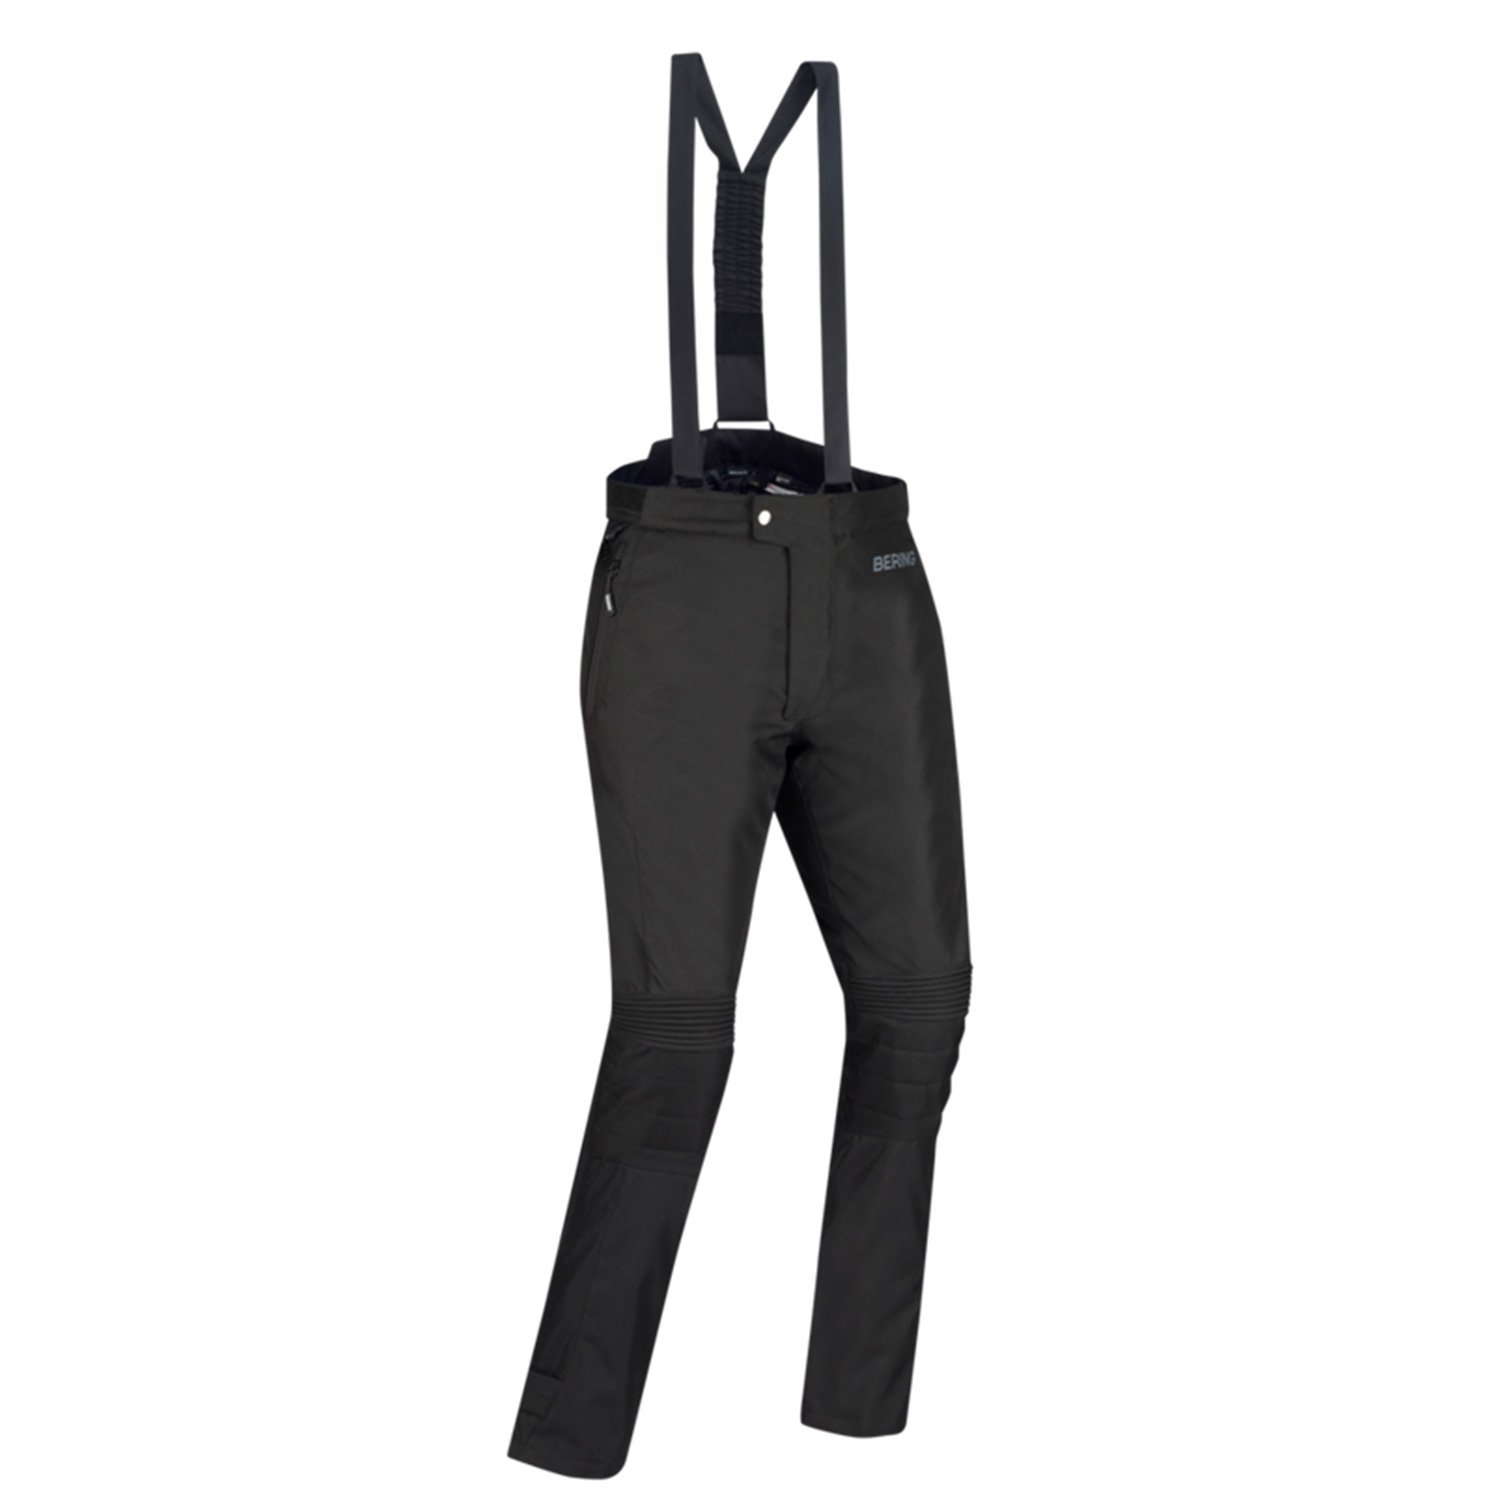 Image of Bering Lady Siberia Trousers Black Size T6 ID 3660815182956